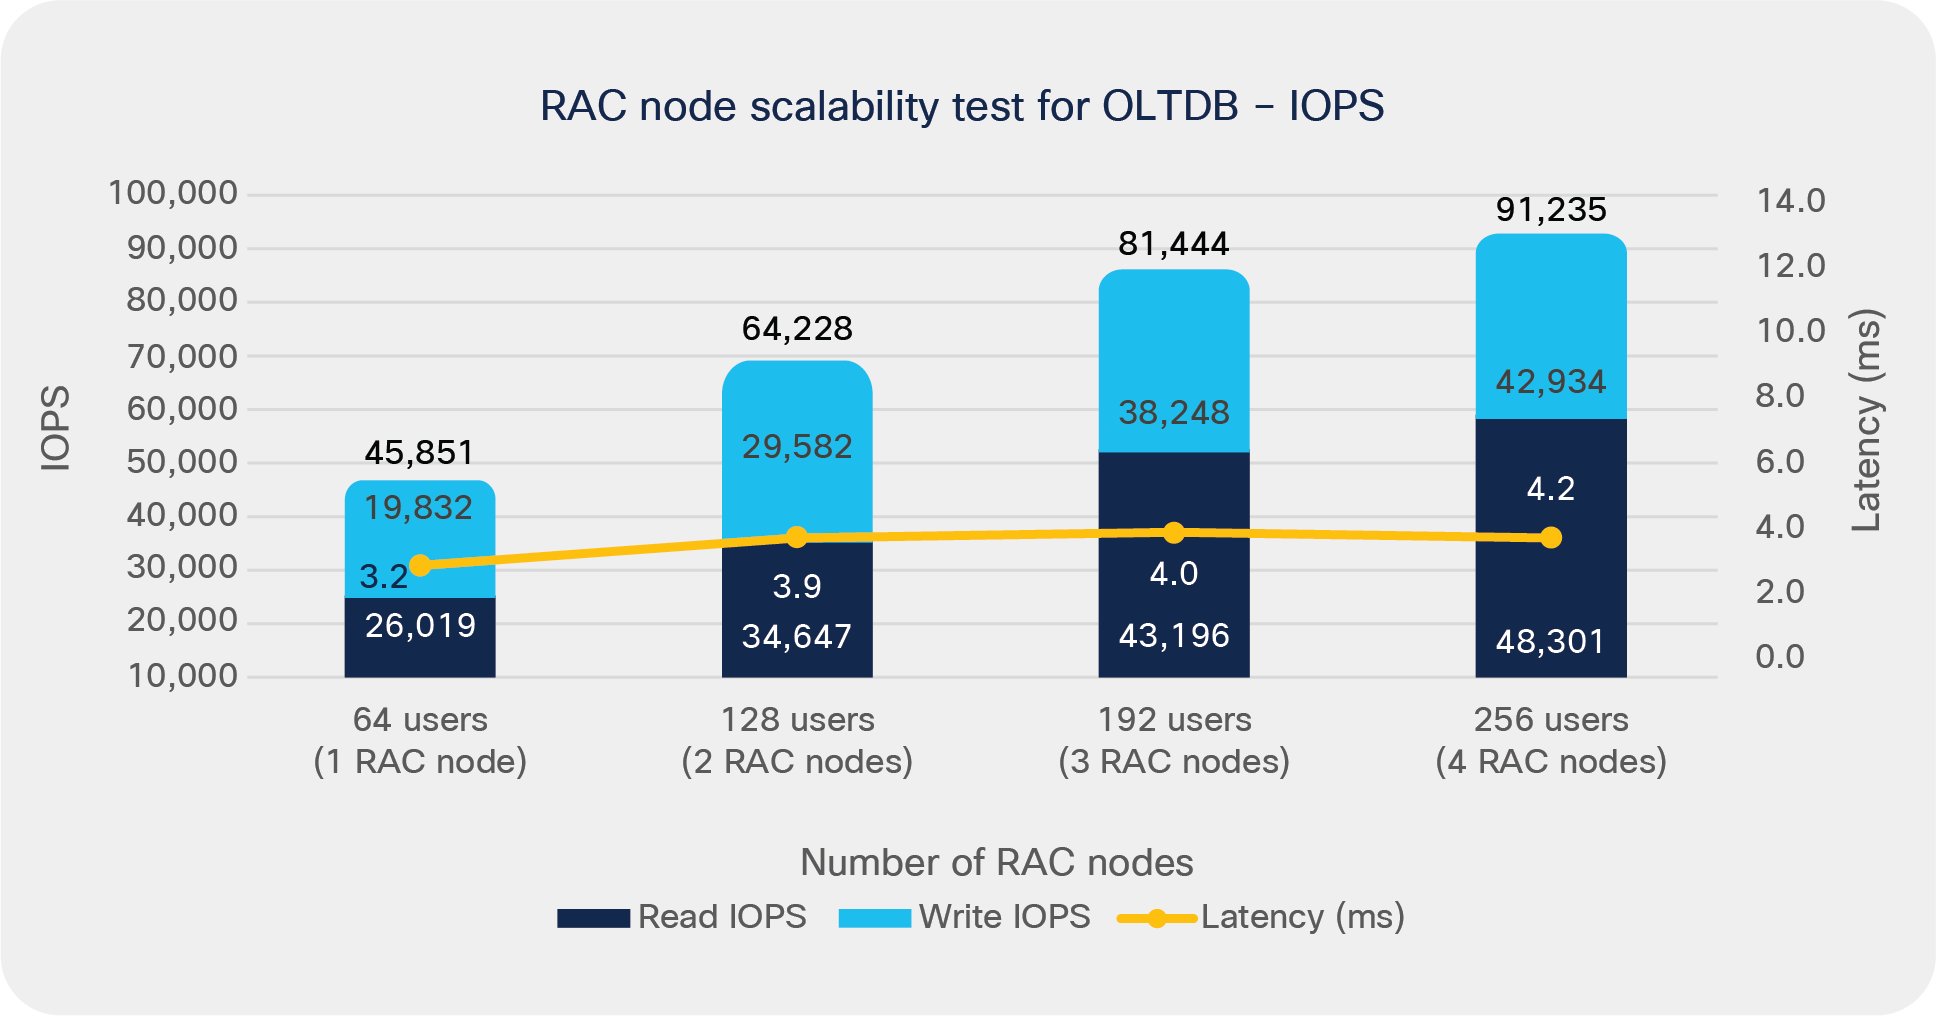 Node scalability IOPS for OLTP database (OLTBDB) (performance as seen by the application)